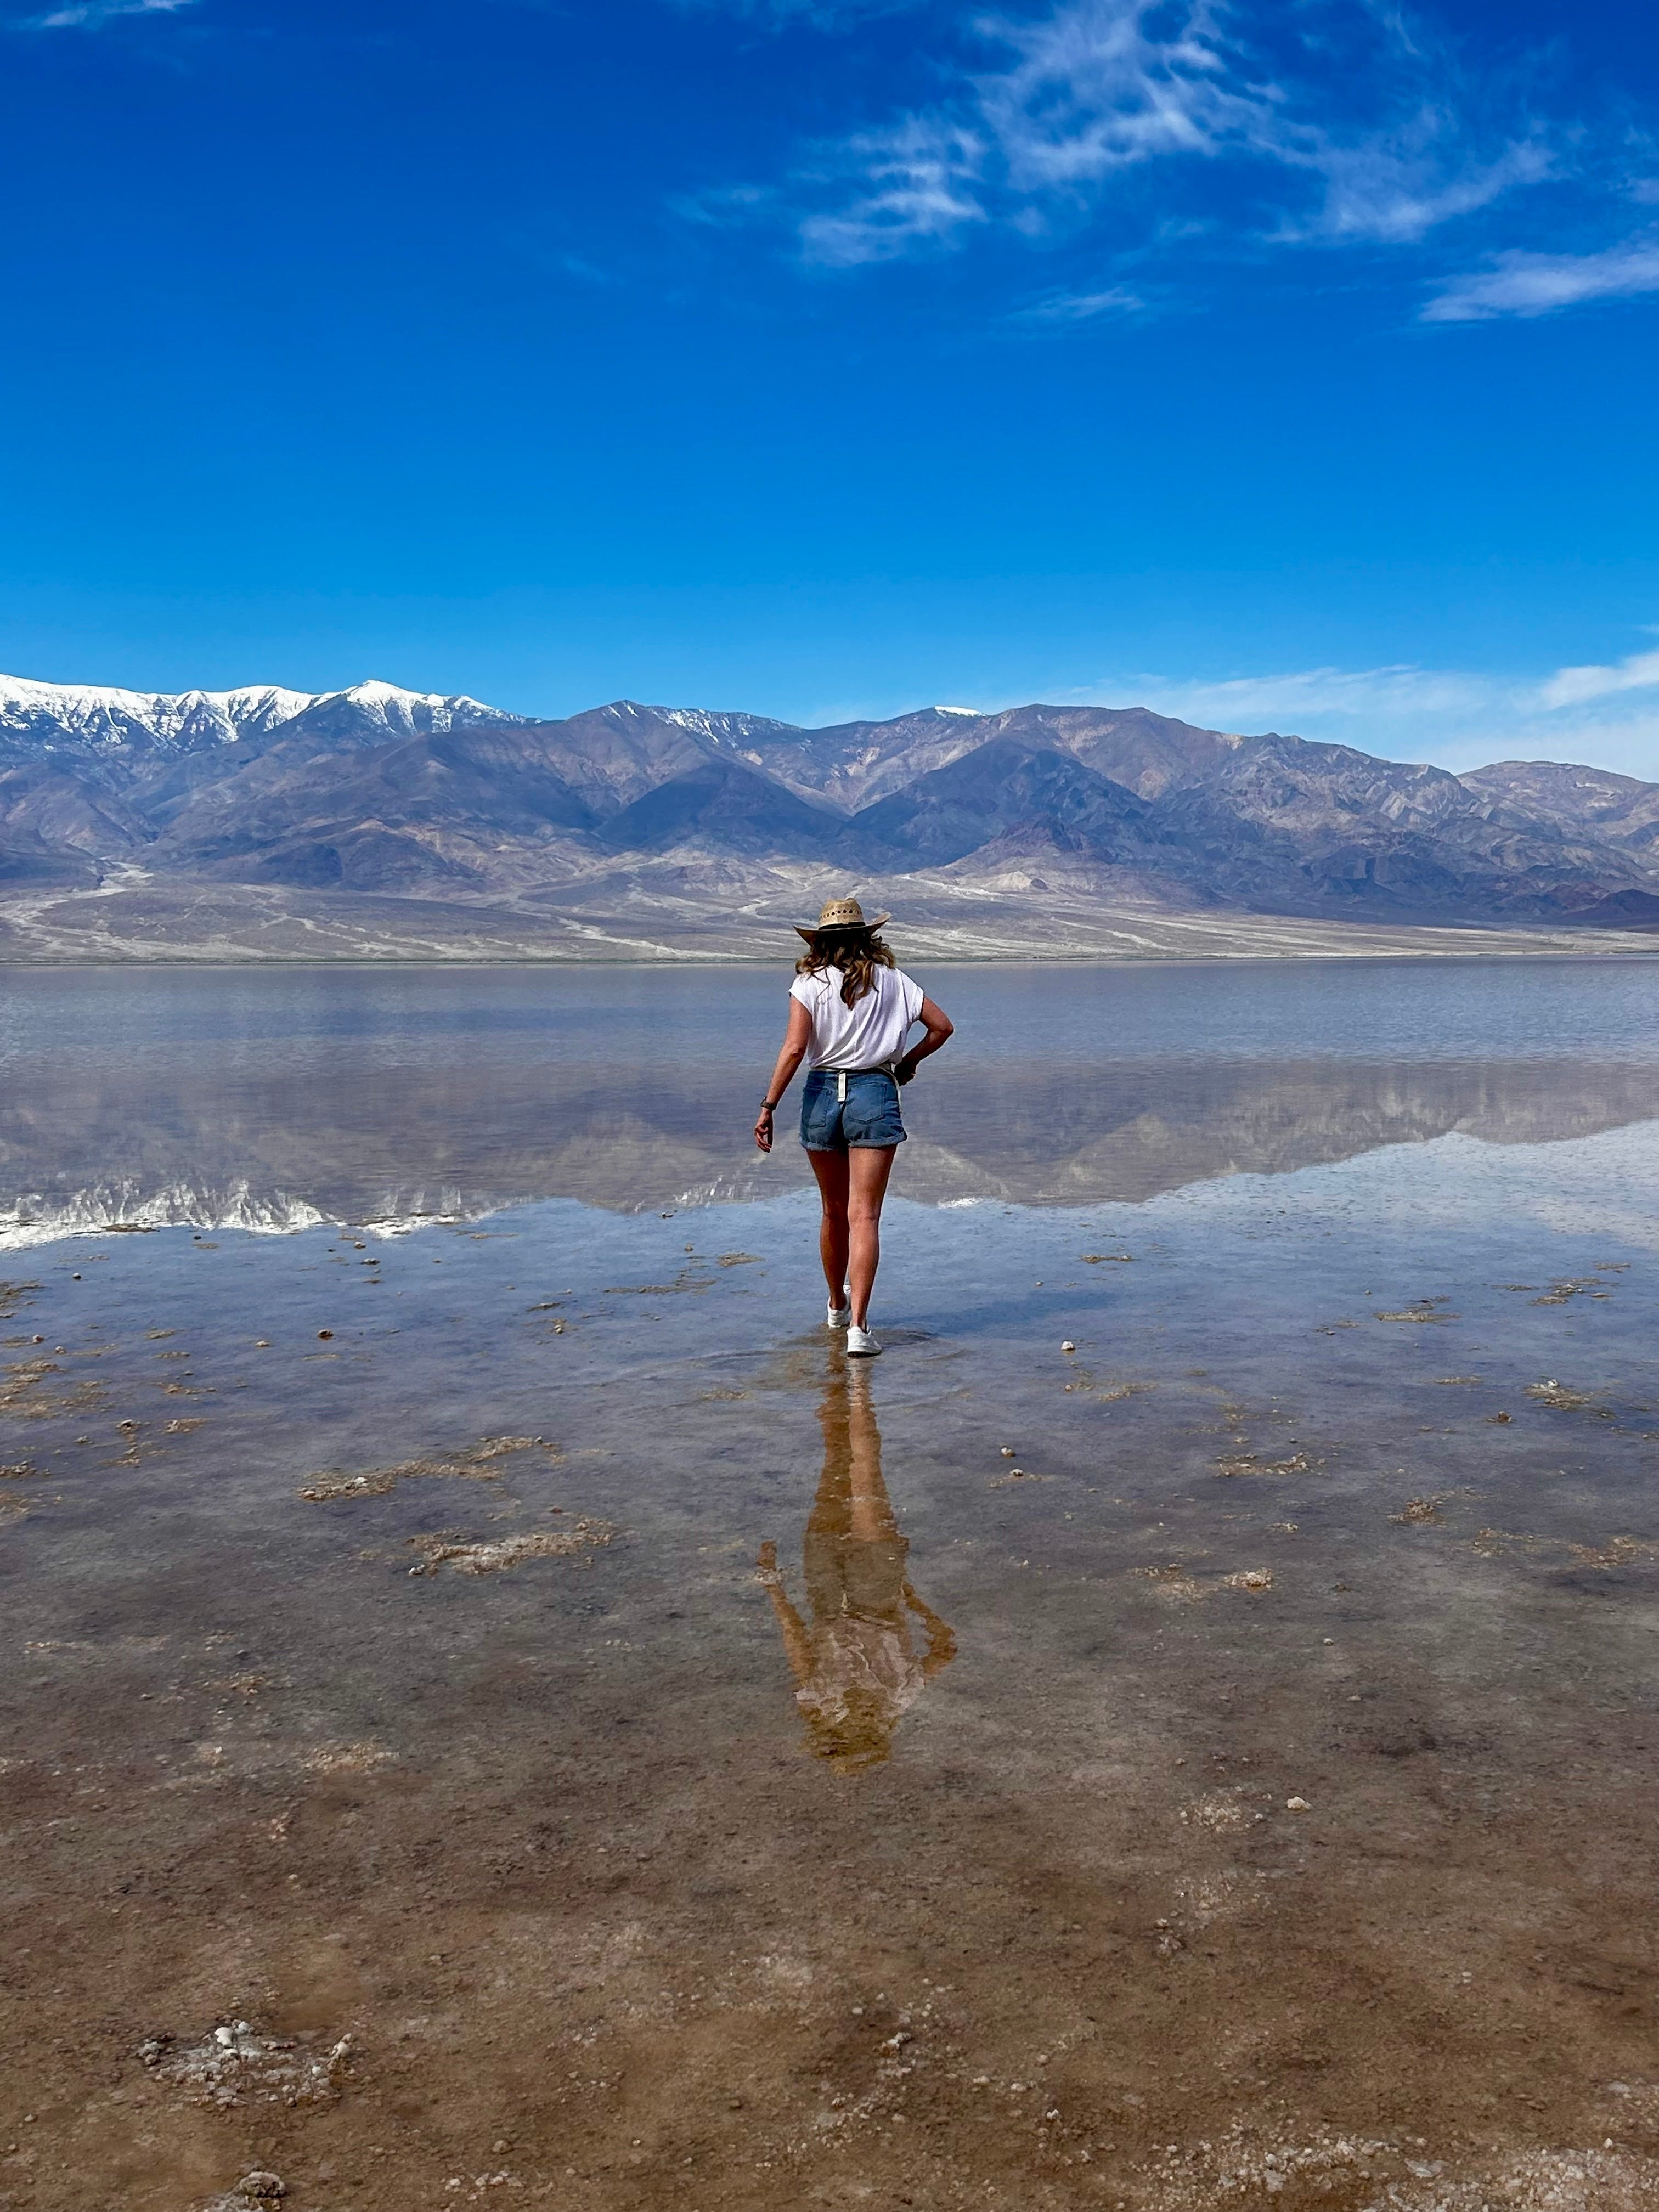 Exploring the Badwater Basin salt flat, home to the lowest point in North America